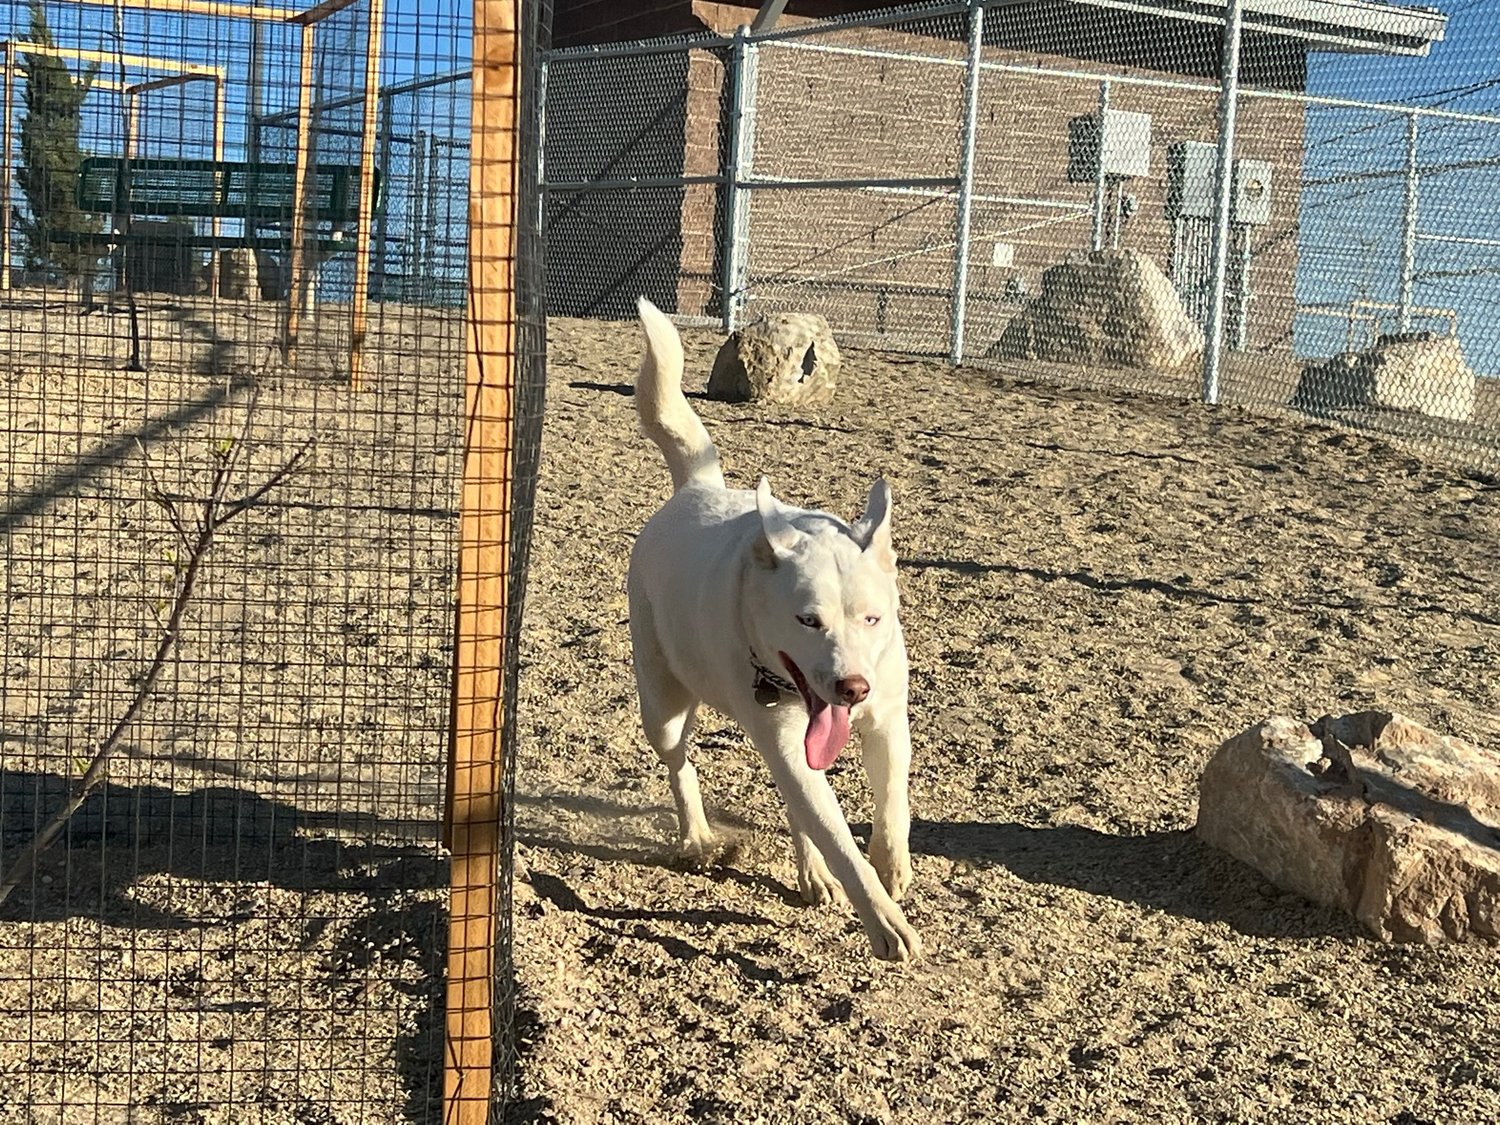 Skyla bounds about in the large dog section of the new Rinconada Dog Park, a project of the voter-approved 2018 General Obligation Bond for the City of Las Cruces.